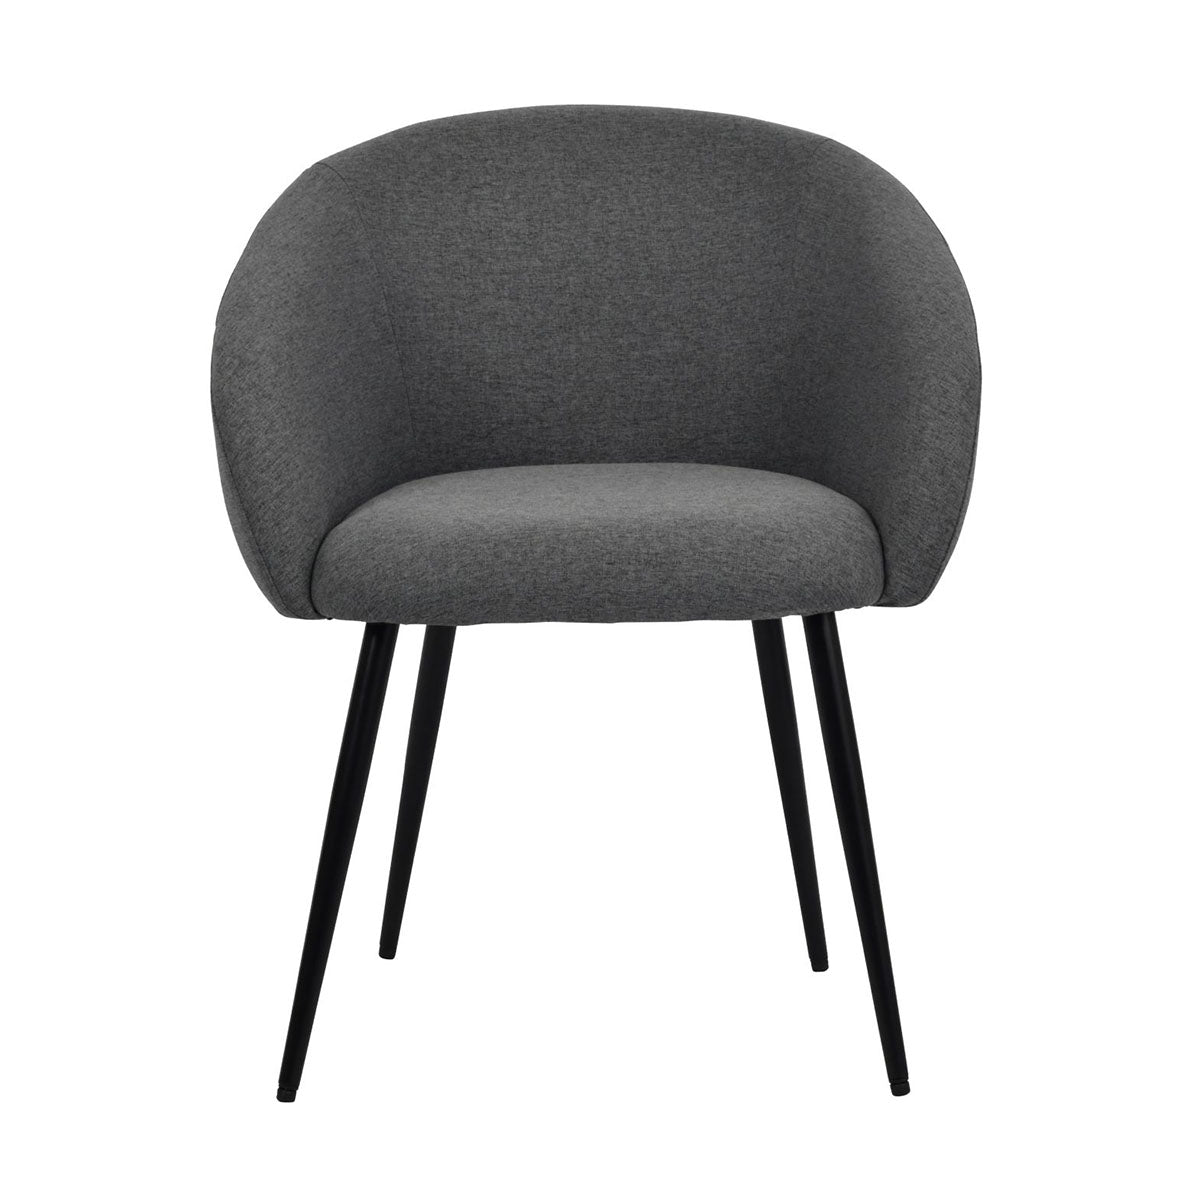 Natalie Dining Chair in Smoke Grey Fabric